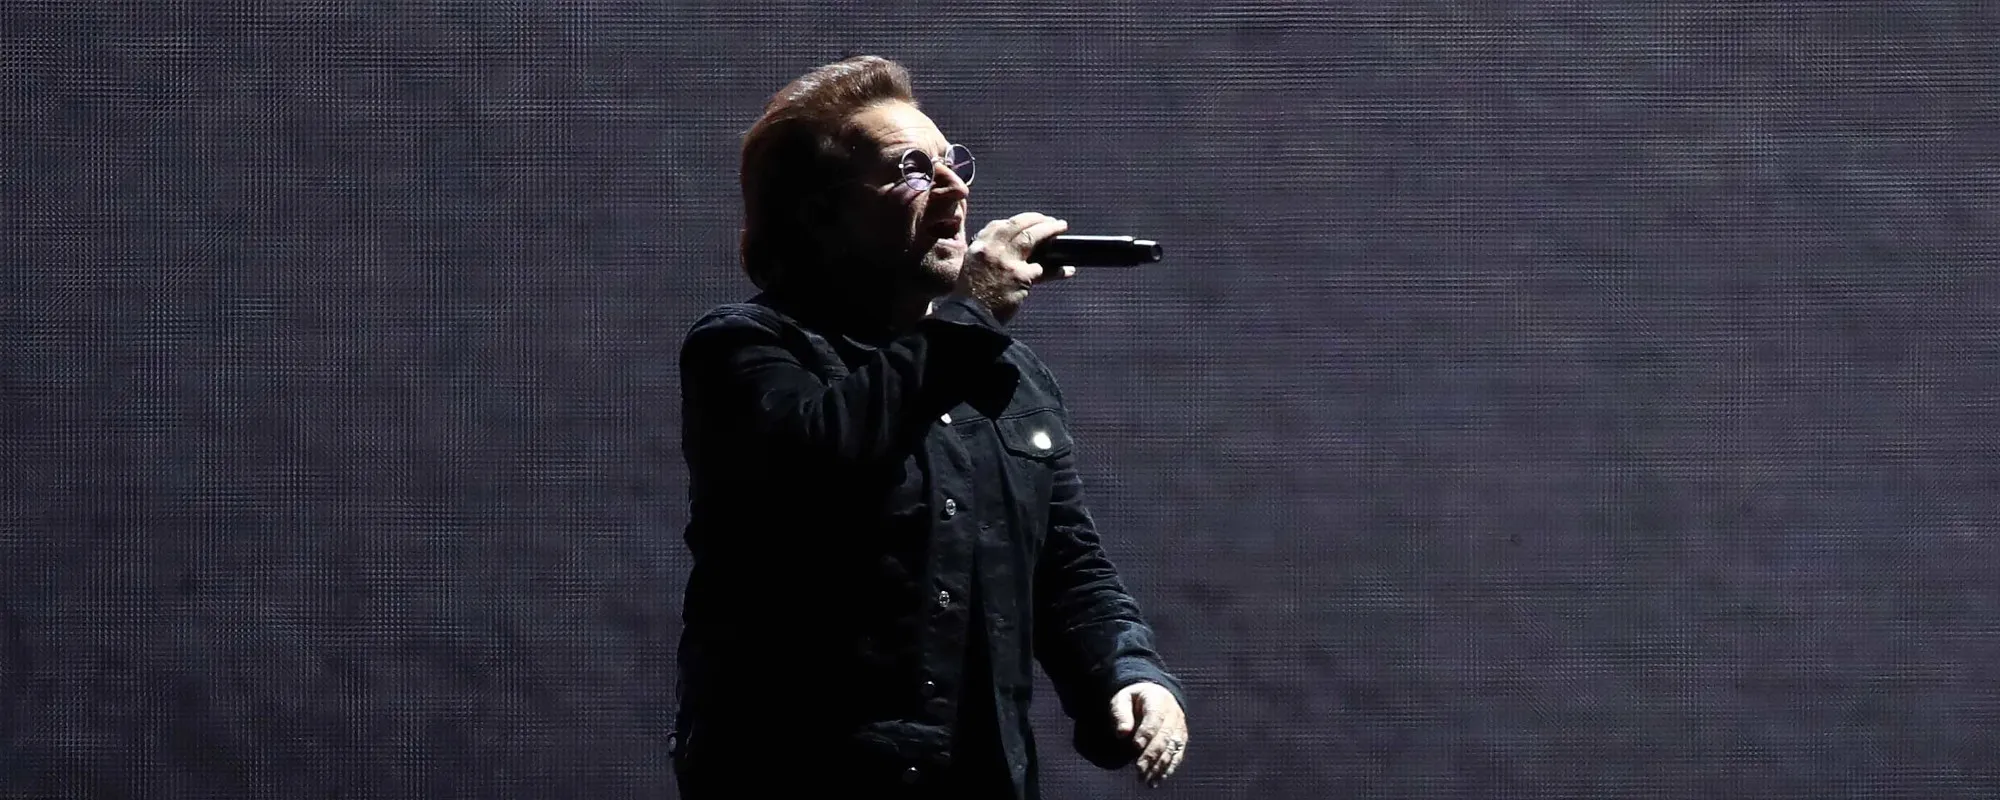 The Meaning Behind “So Cruel” by U2 and the Event Within the Band that Inspired Bono to Write It